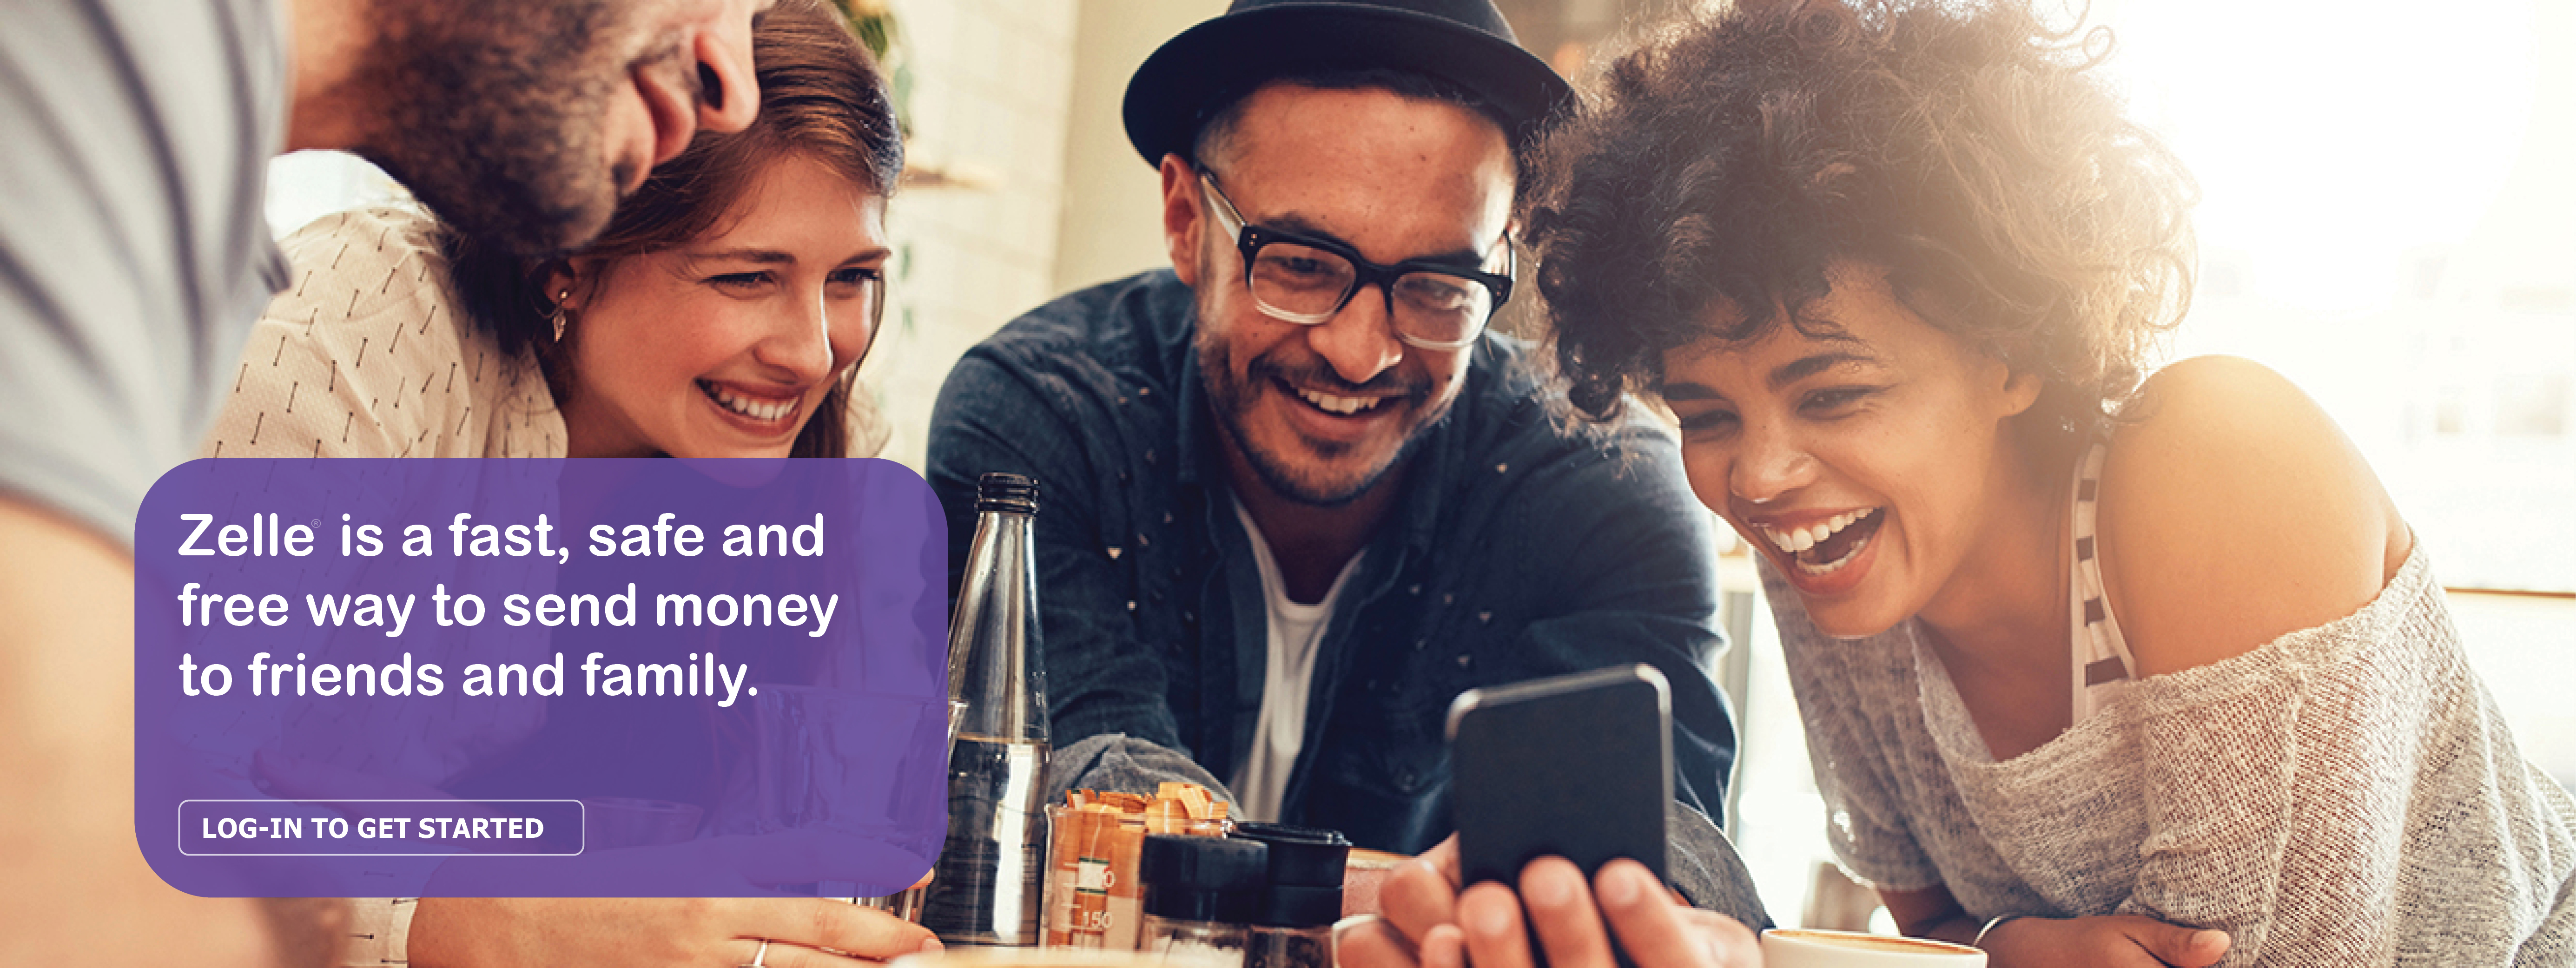 Zelle is a fast, safe and free way to end money to friends and family. Log-in to get started..